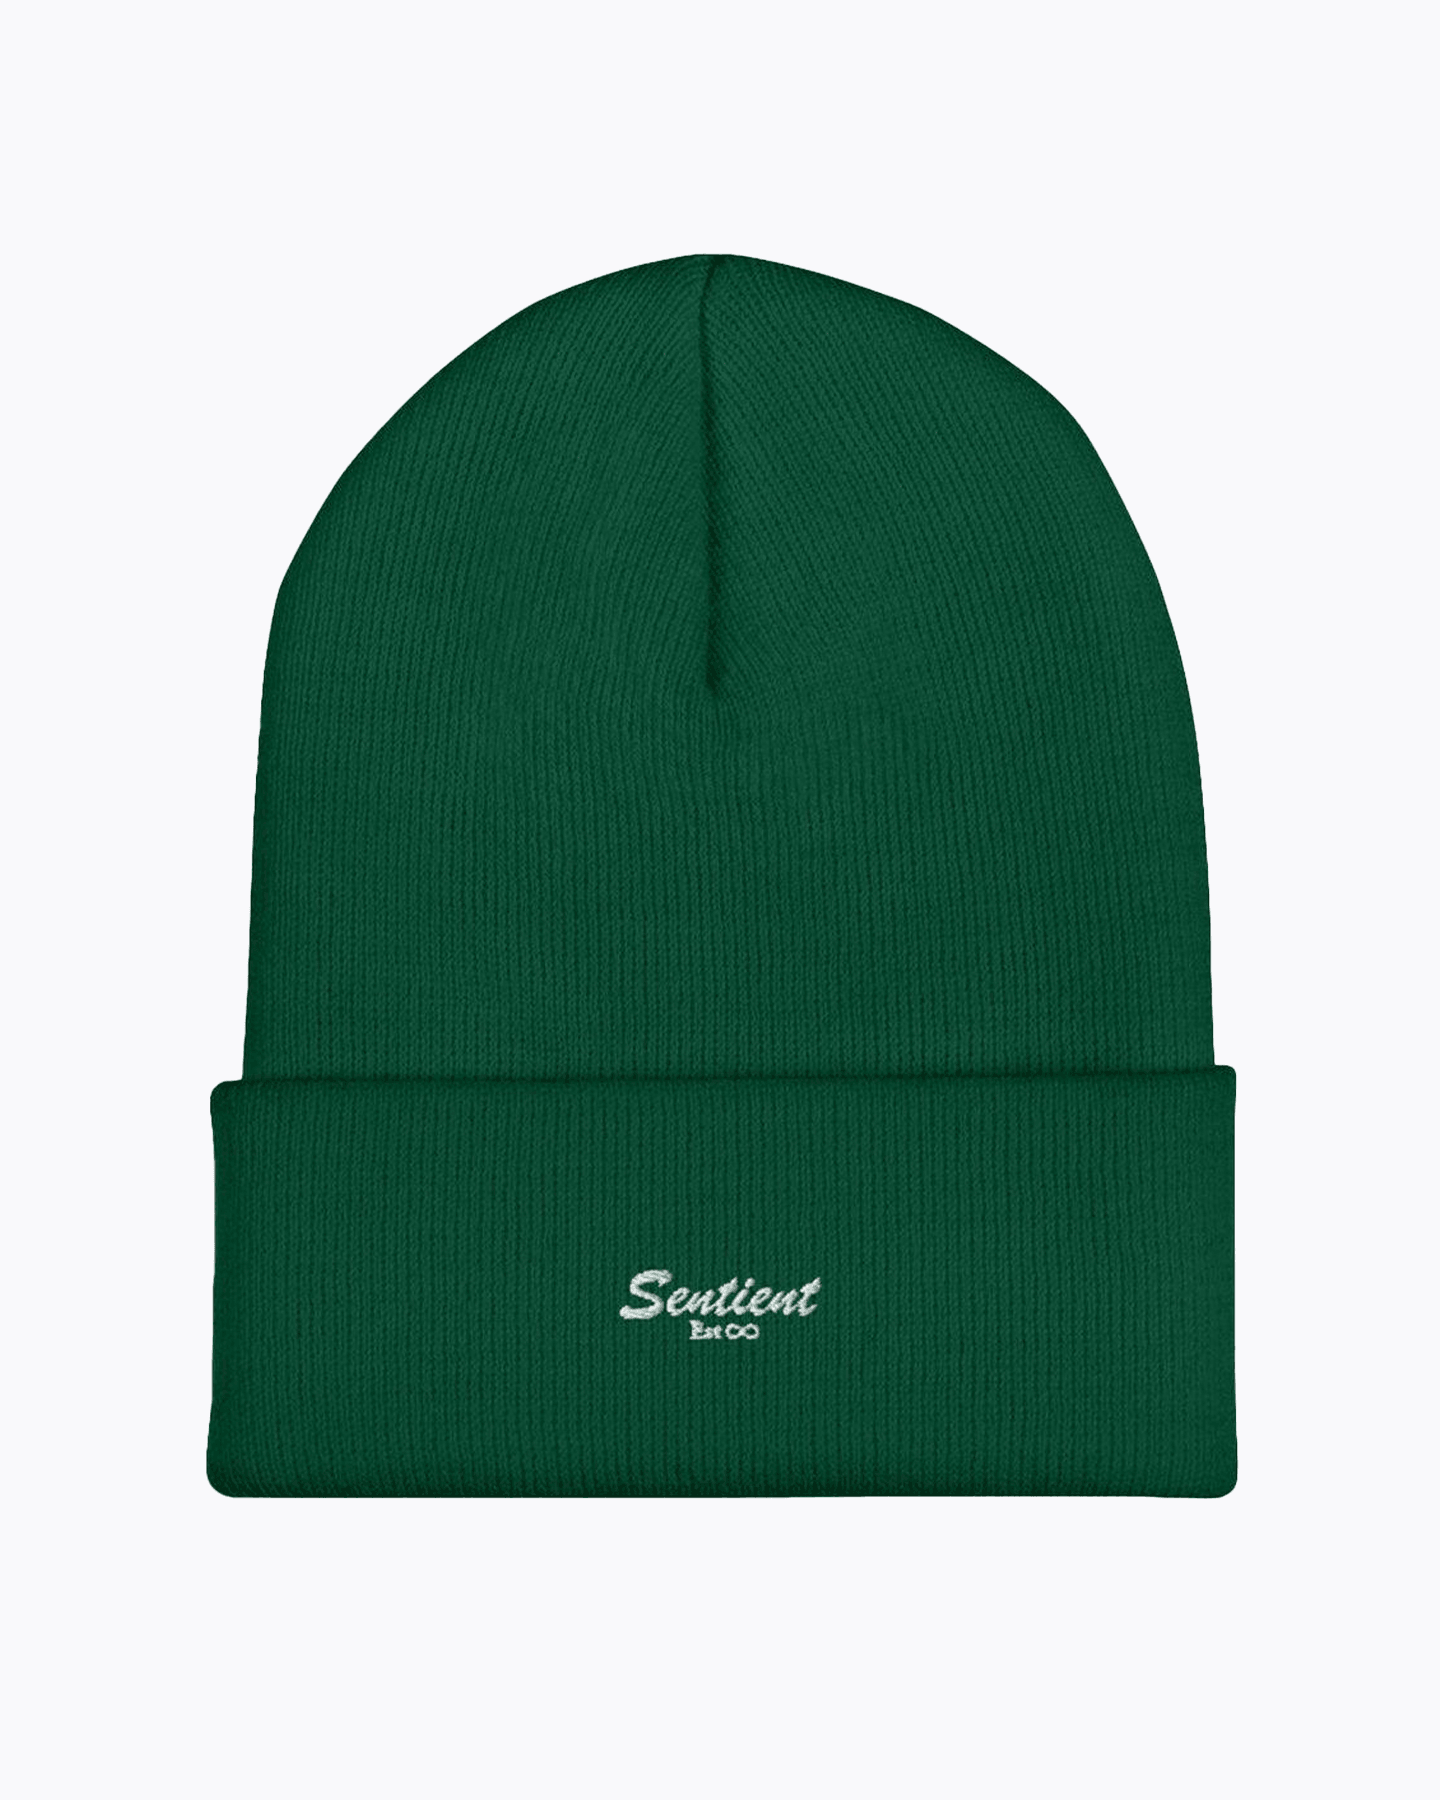 SNT Cuffed Beanie - Sentient Official